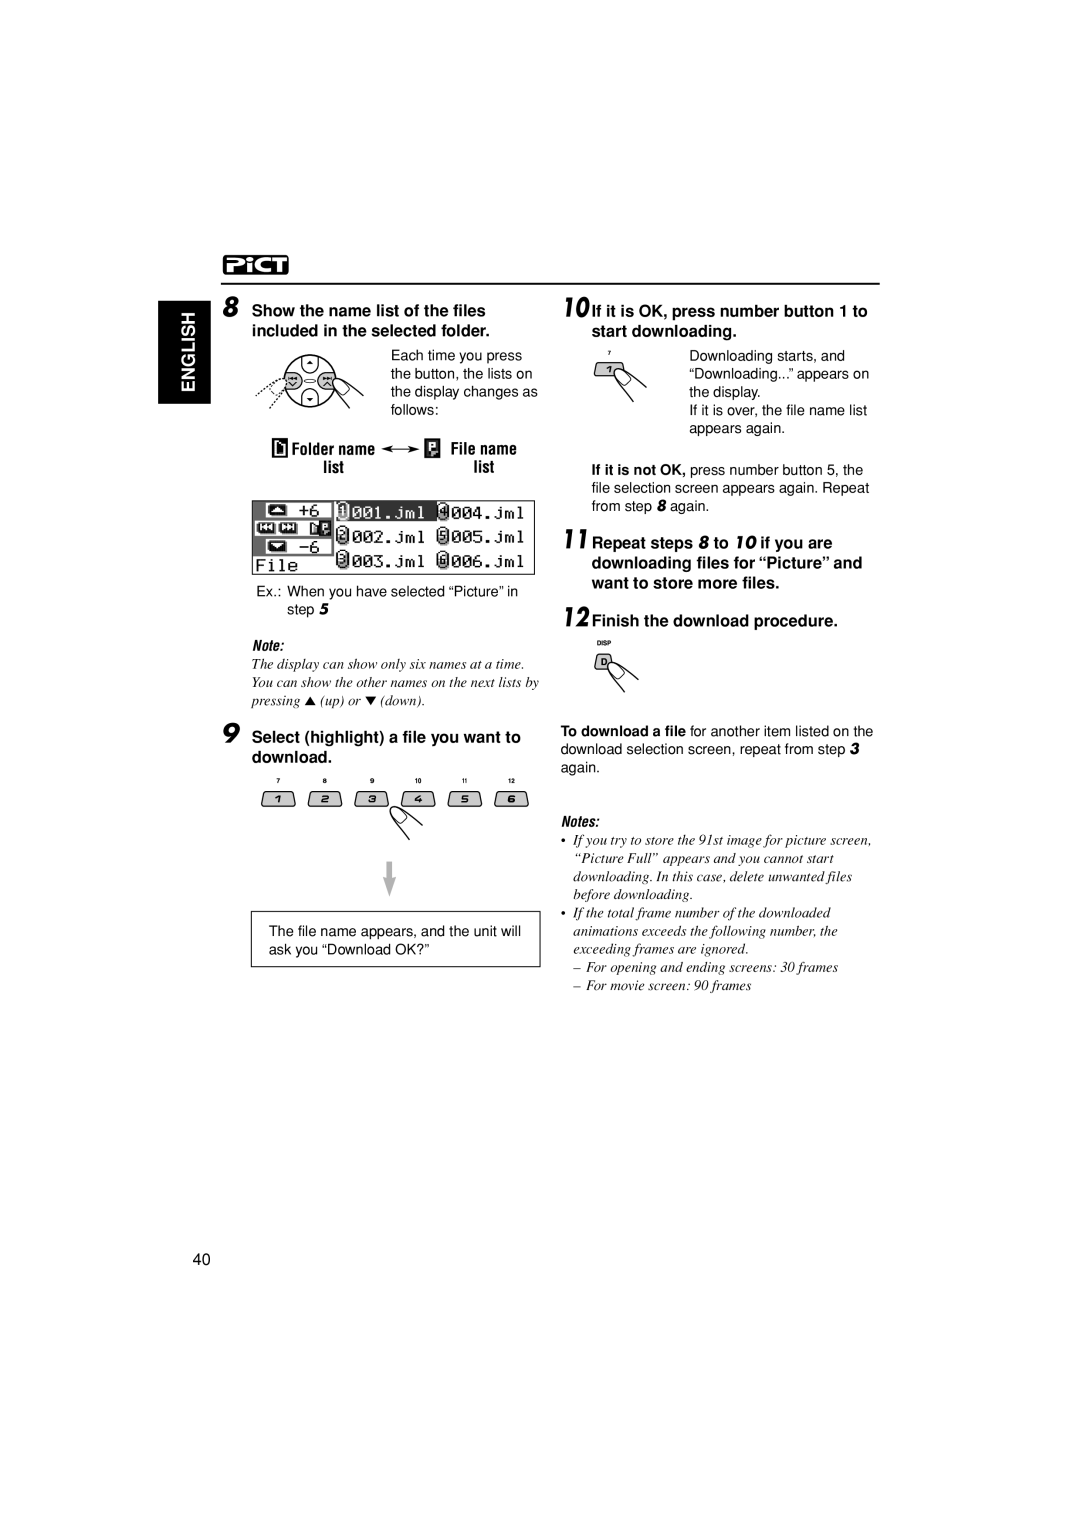 JVC KD-LH401 English, Show the name list of the files included in the selected folder, Finish the download procedure 